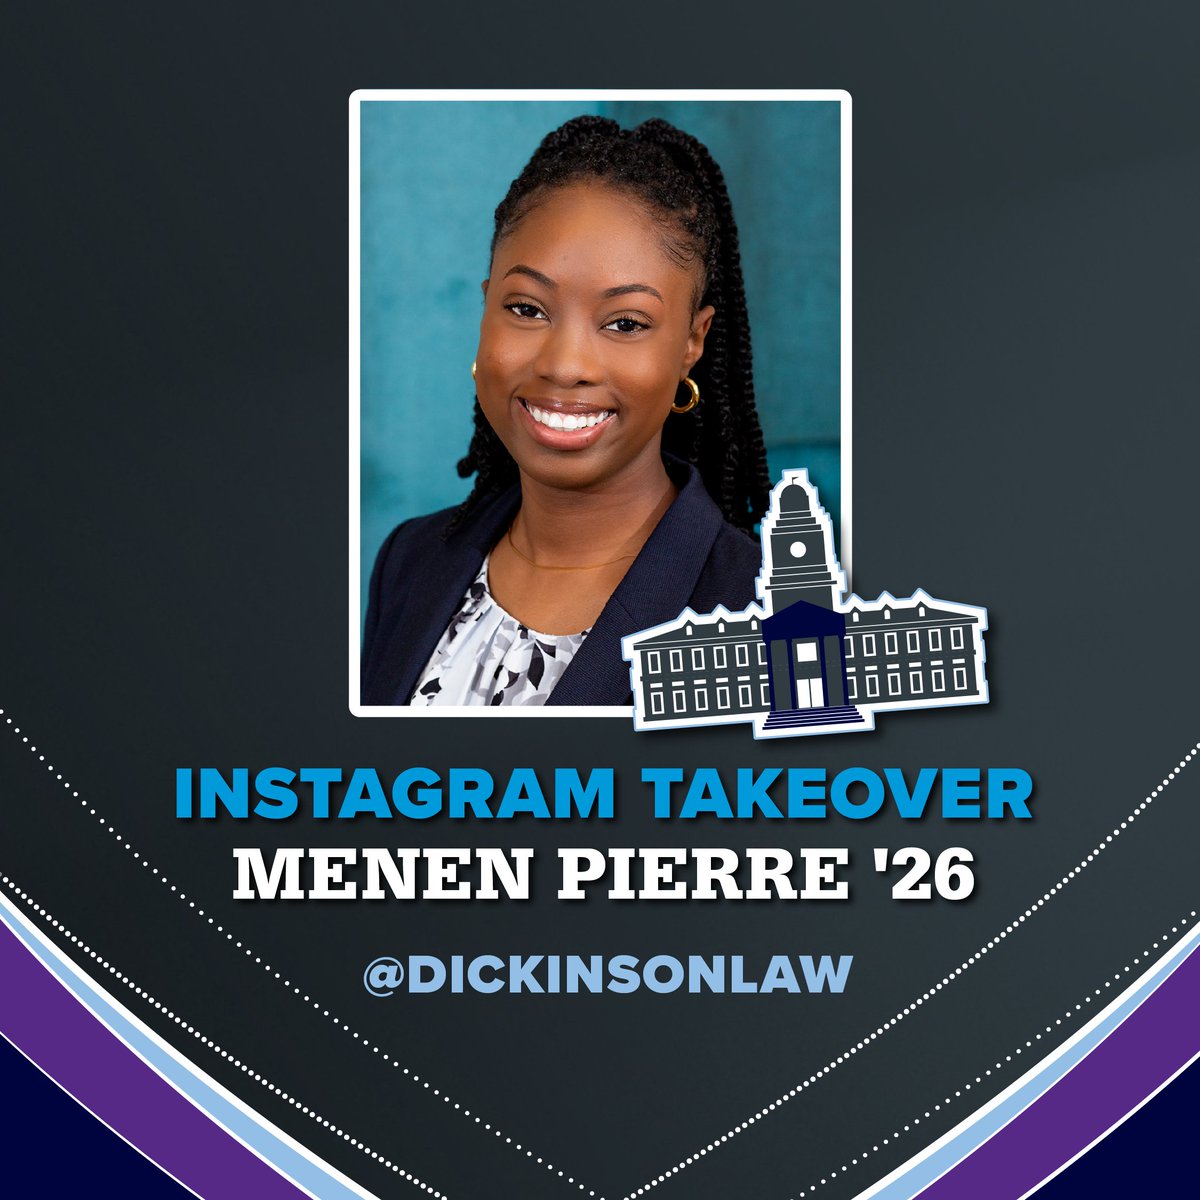 Commencement weekend is upon us! 🎓 🎉 Catch Menen Pierre '26 on our Instagram stories as she showcases the Donning of the Kente Ceremony and the Dickinson Law Awards Ceremony tomorrow. #PracticeGreatness #DickinsonLaw2024